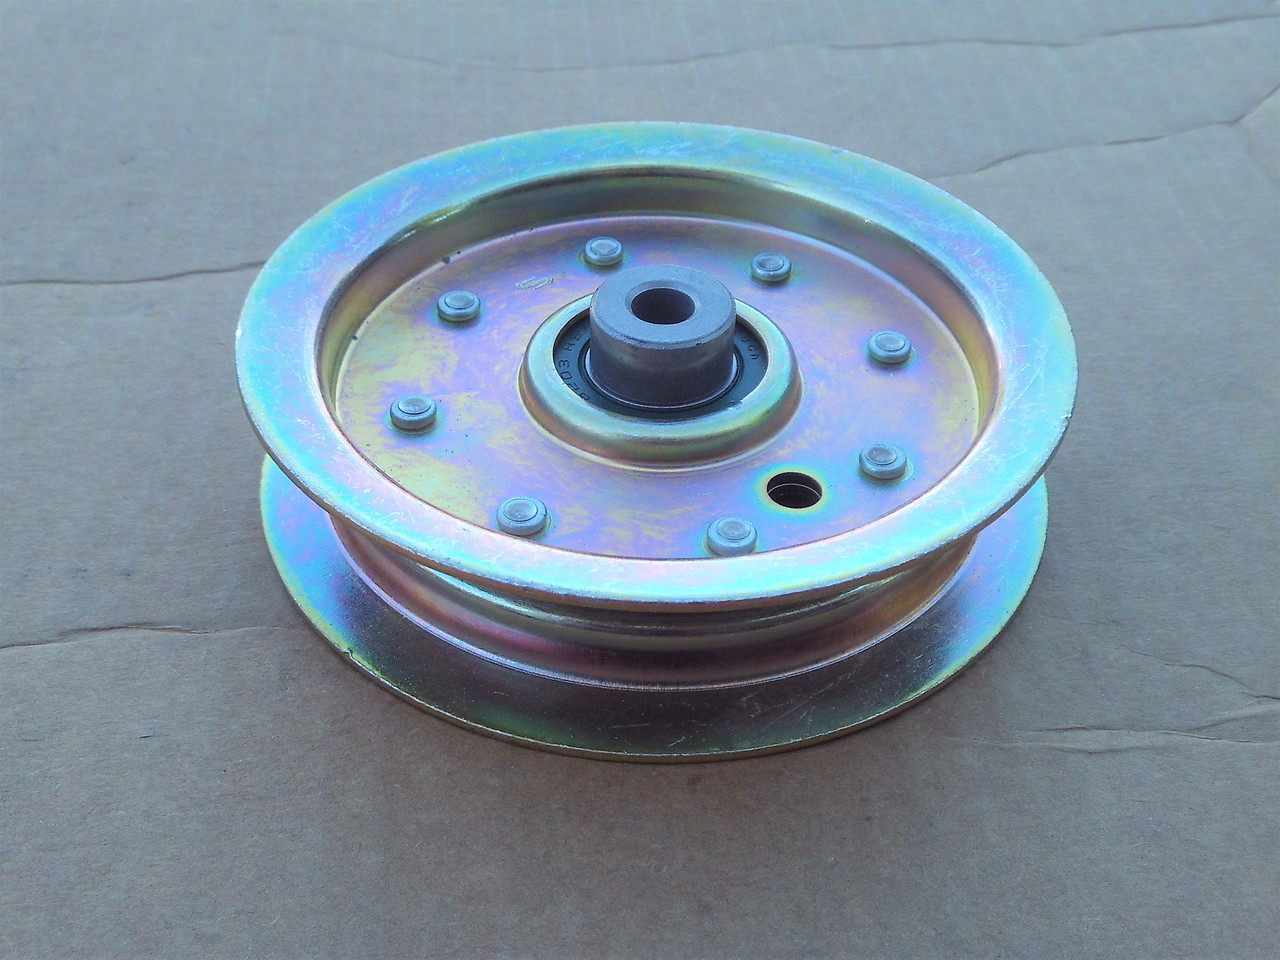 Idler Pulley for Scag 482299 Height: 1-1/8" ID: 3/8" OD: 4-7/8"